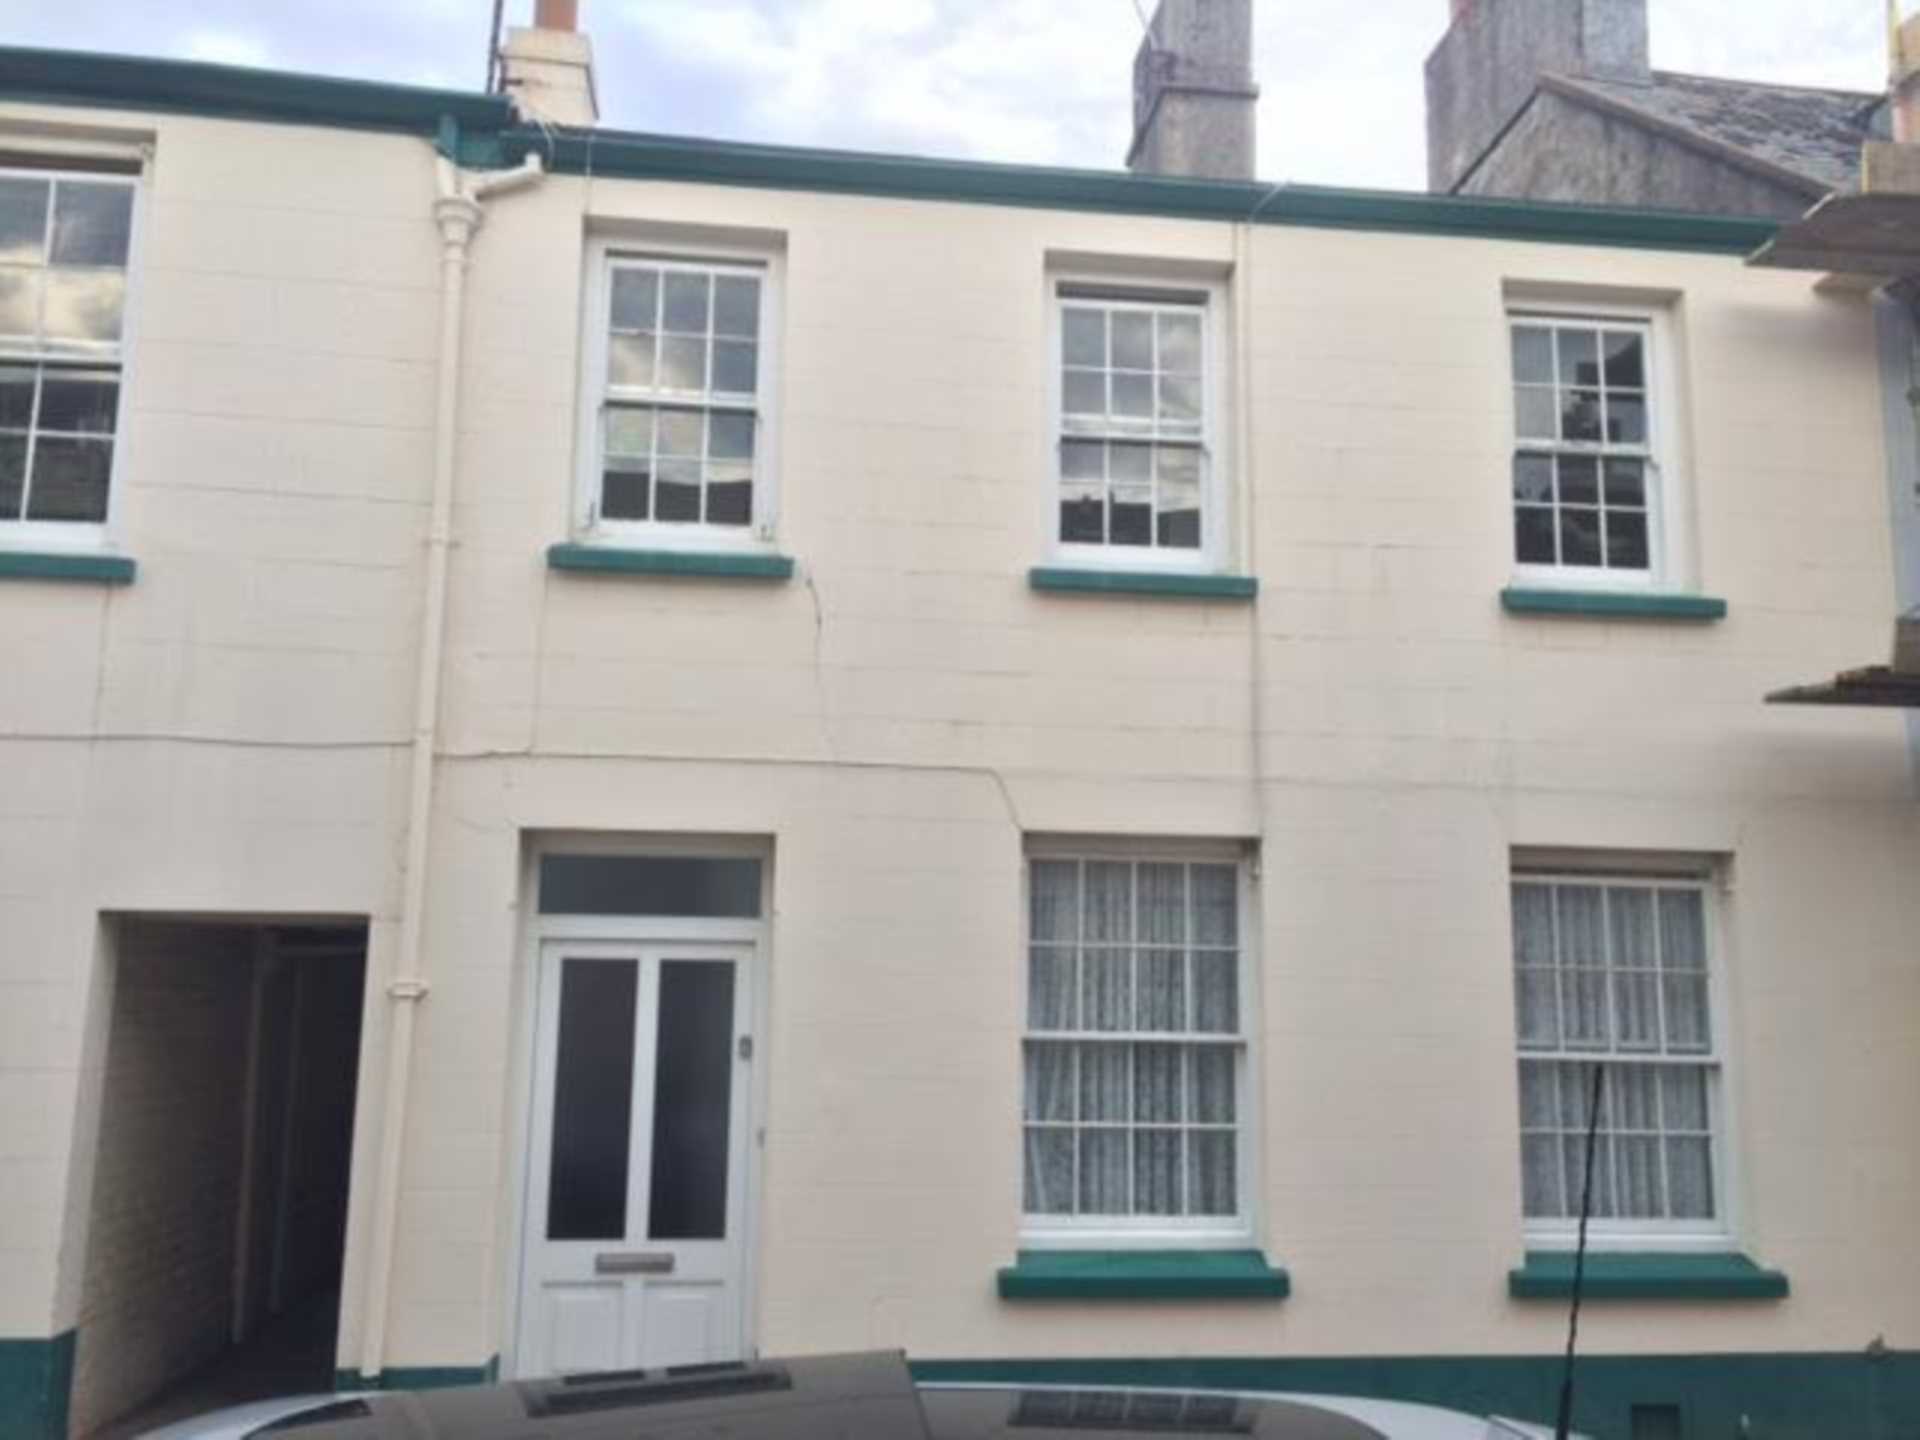 Clearview Street, St Helier, Image 1